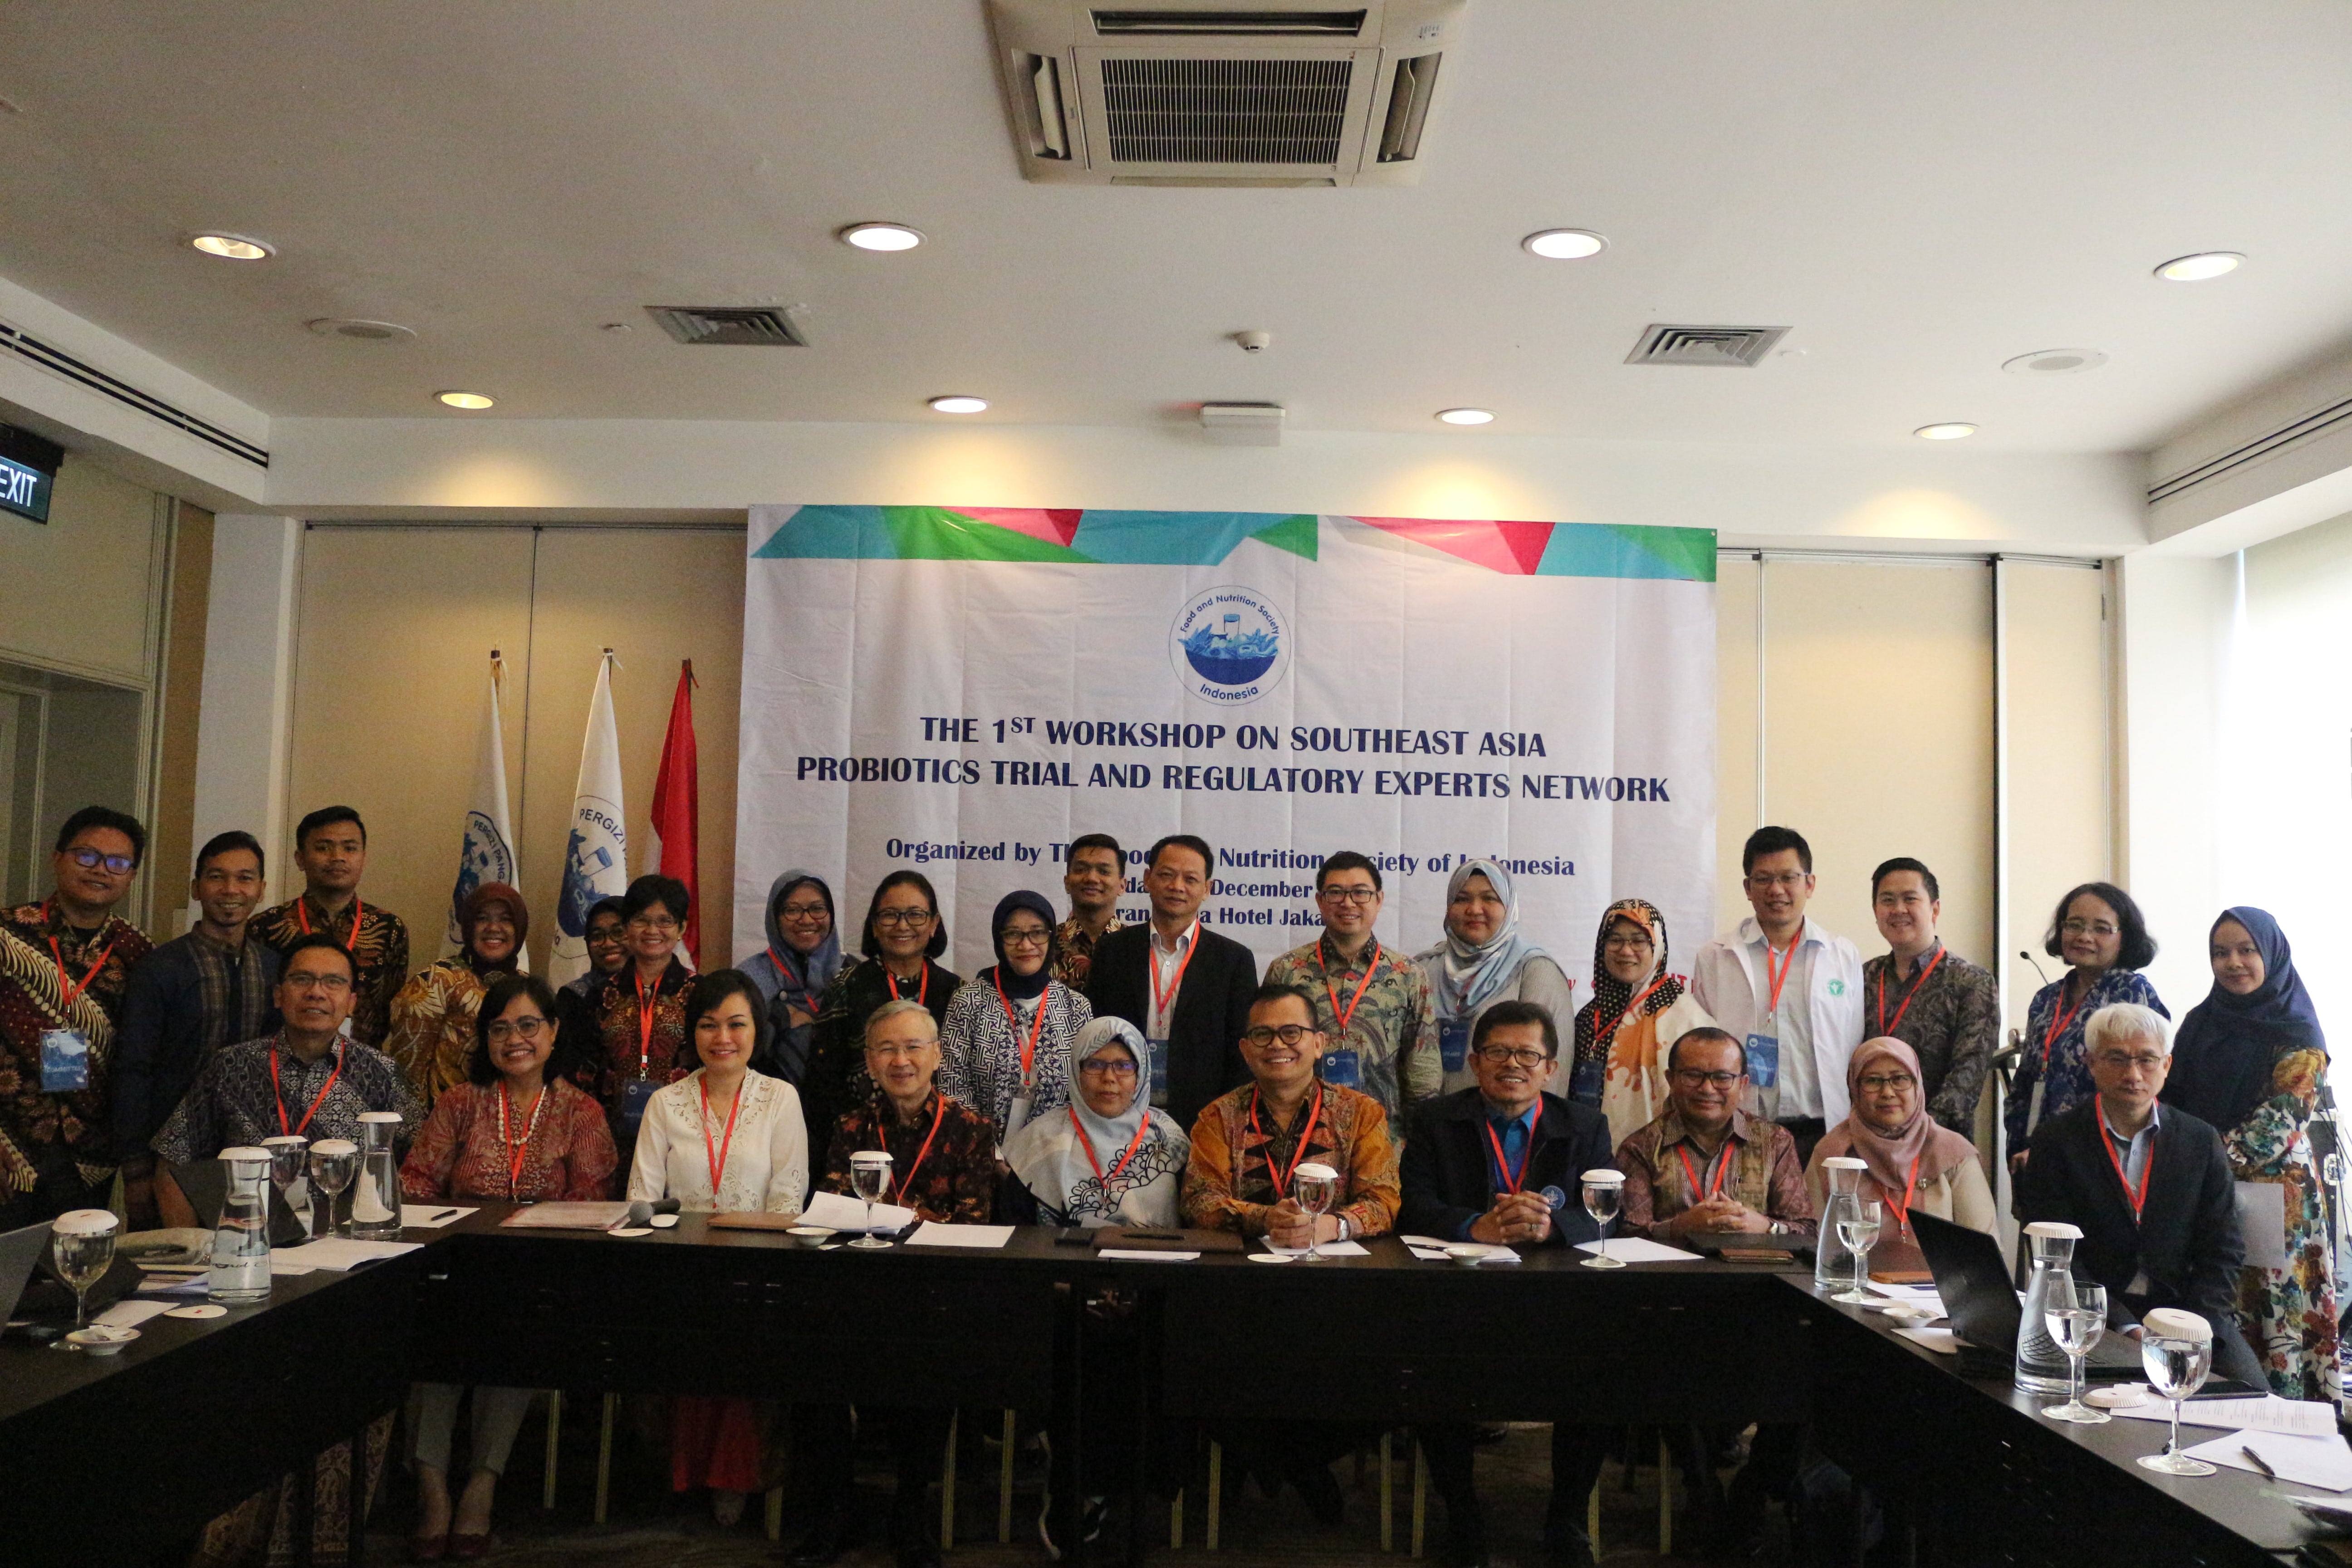 1st WORKSHOP ON SOUTHEAST ASIA PROBIOTICS SCIENTIFIC AND REGULATORY EXPERTS NETWORK